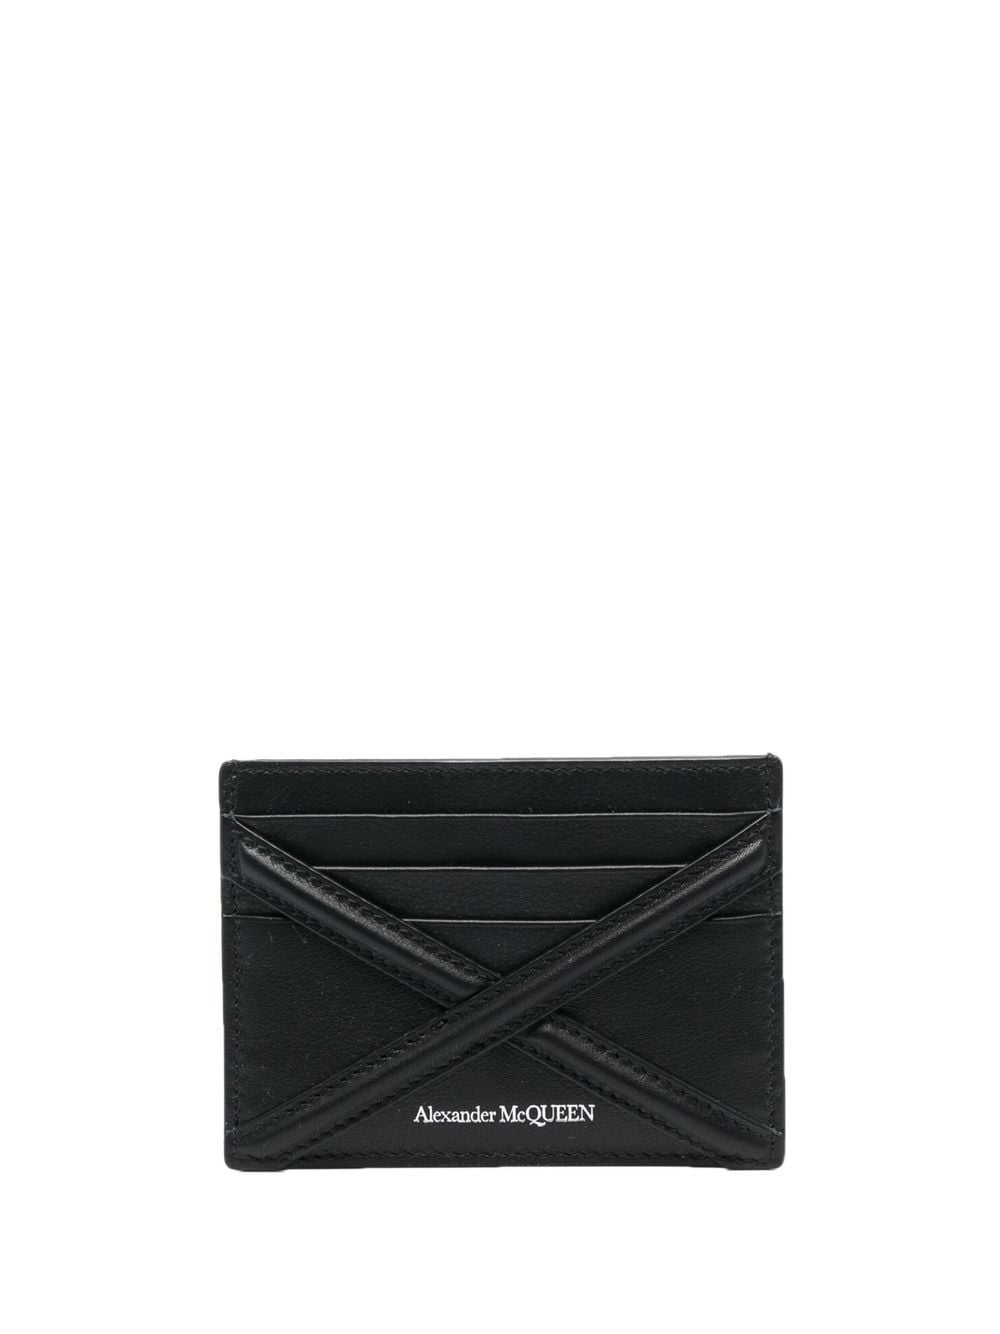 The Harness cardholder